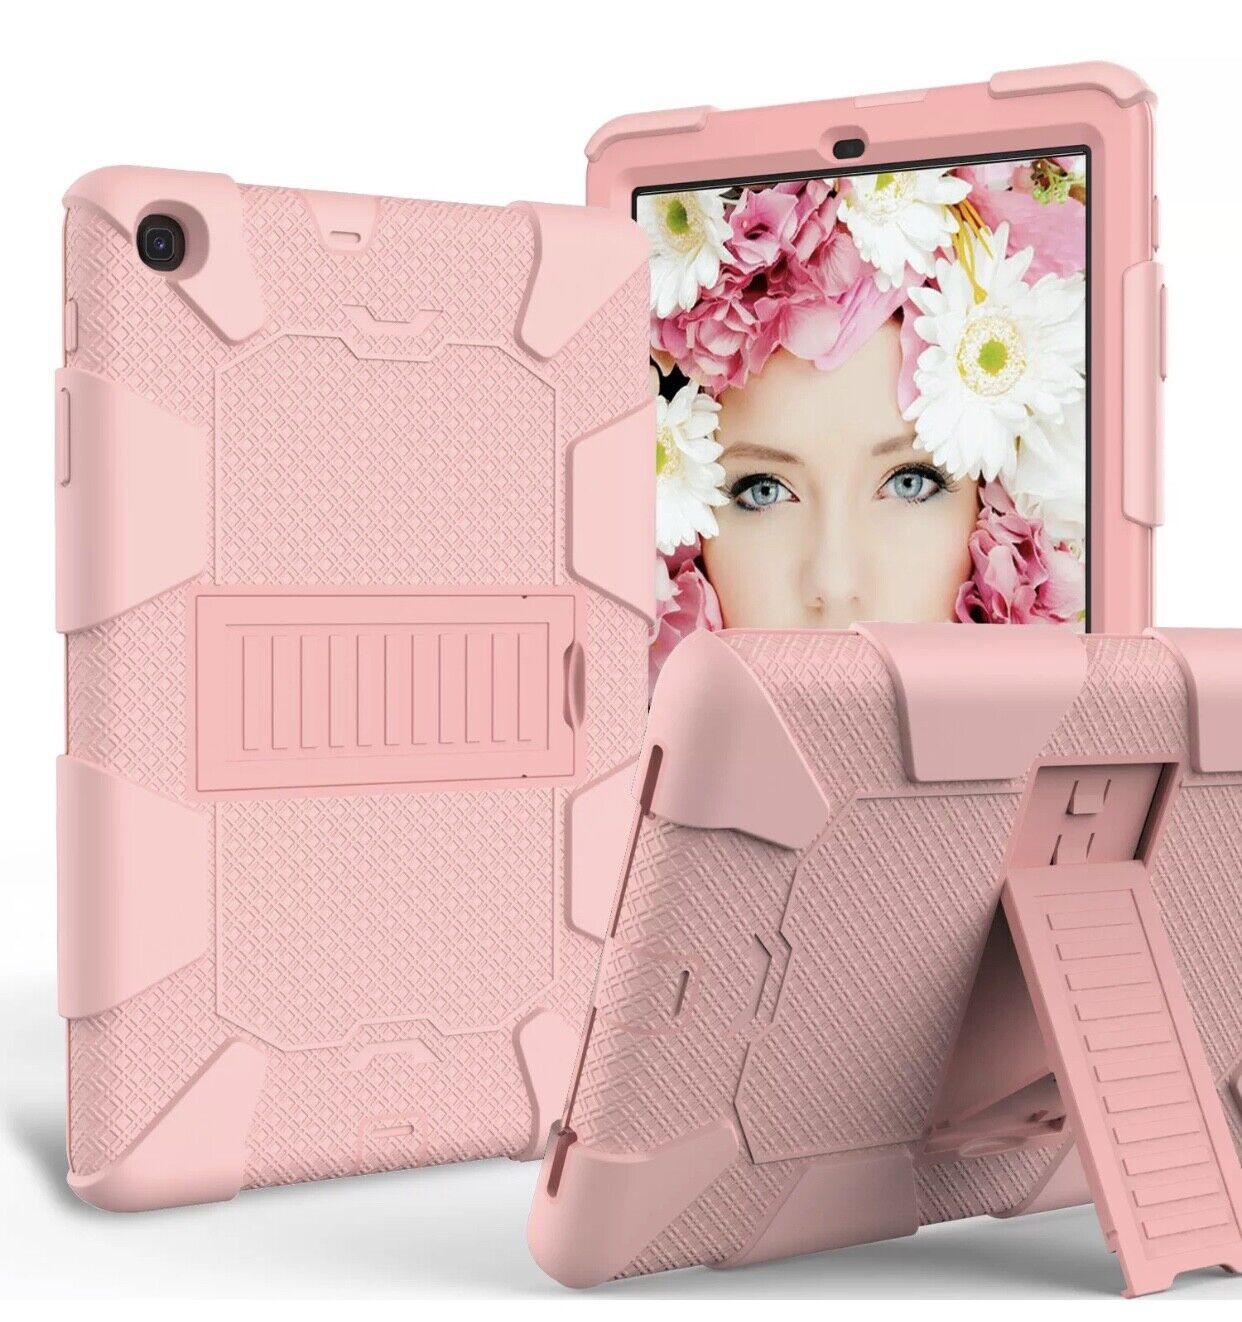 Shockproof Heavy Duty Armor Case Cover Stand For Samsung Tab A 8.4 SM-T307 2020